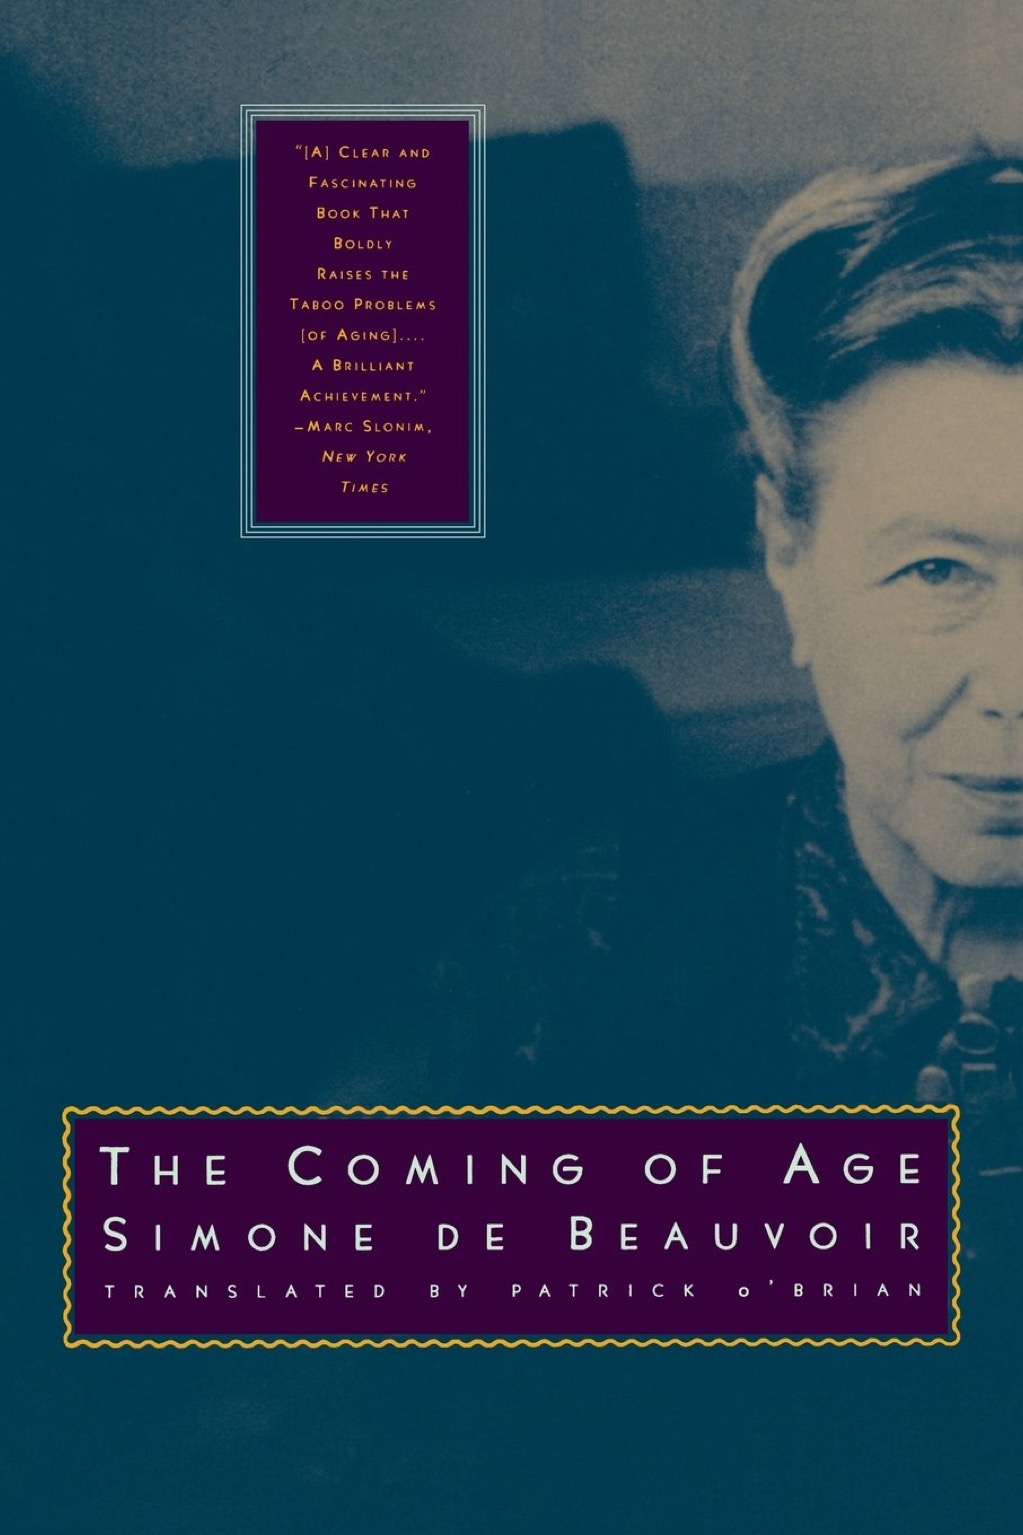 The Coming of Age by Simone de Beauvoir